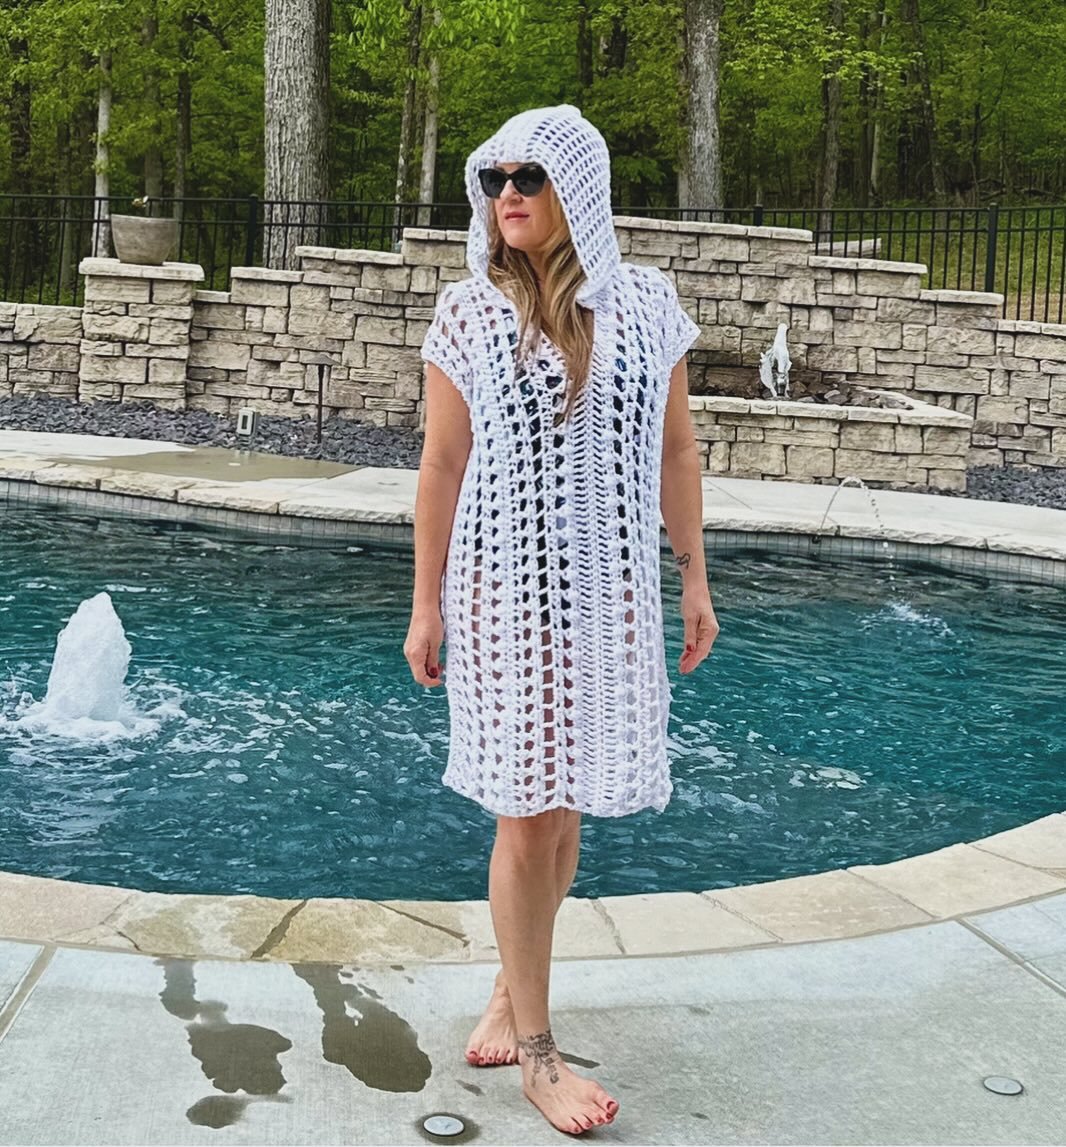 ☀️The Breezy Hooded Swim Cover Crochet Pattern has been RELEASED! ☀️
You&rsquo;ll find so many different options with this pattern. Make it long, short, fitted, or boxy. Add fringe, or not! Take 70% off the next 24 hours in all@my shops! 
Website😎 h